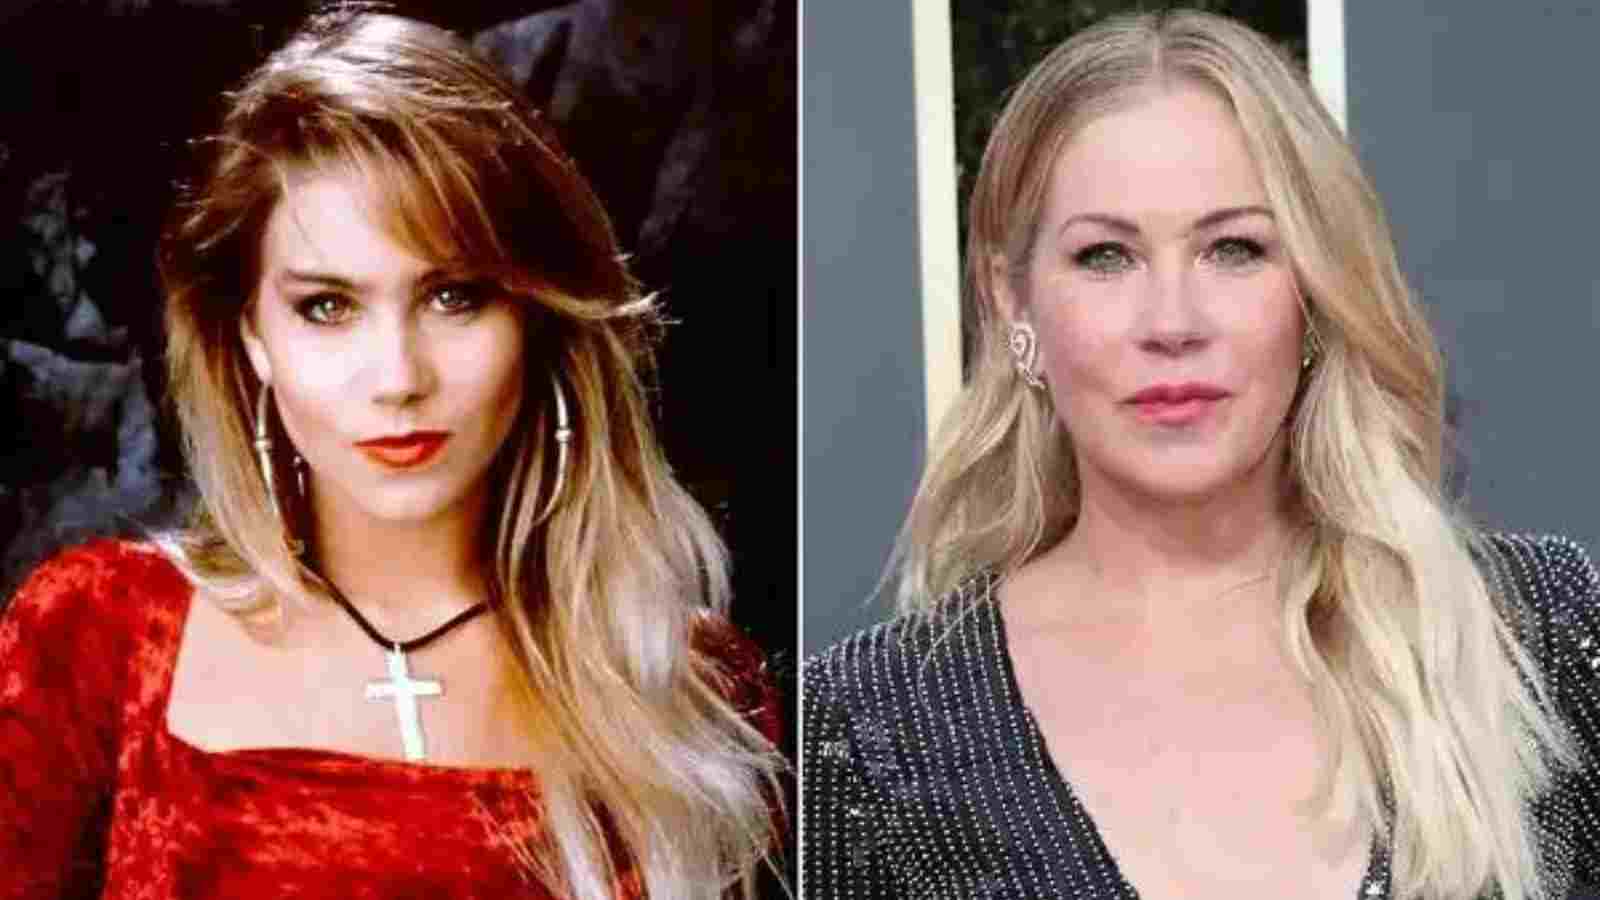 Christina Applegate in 'Married with Children' then and now